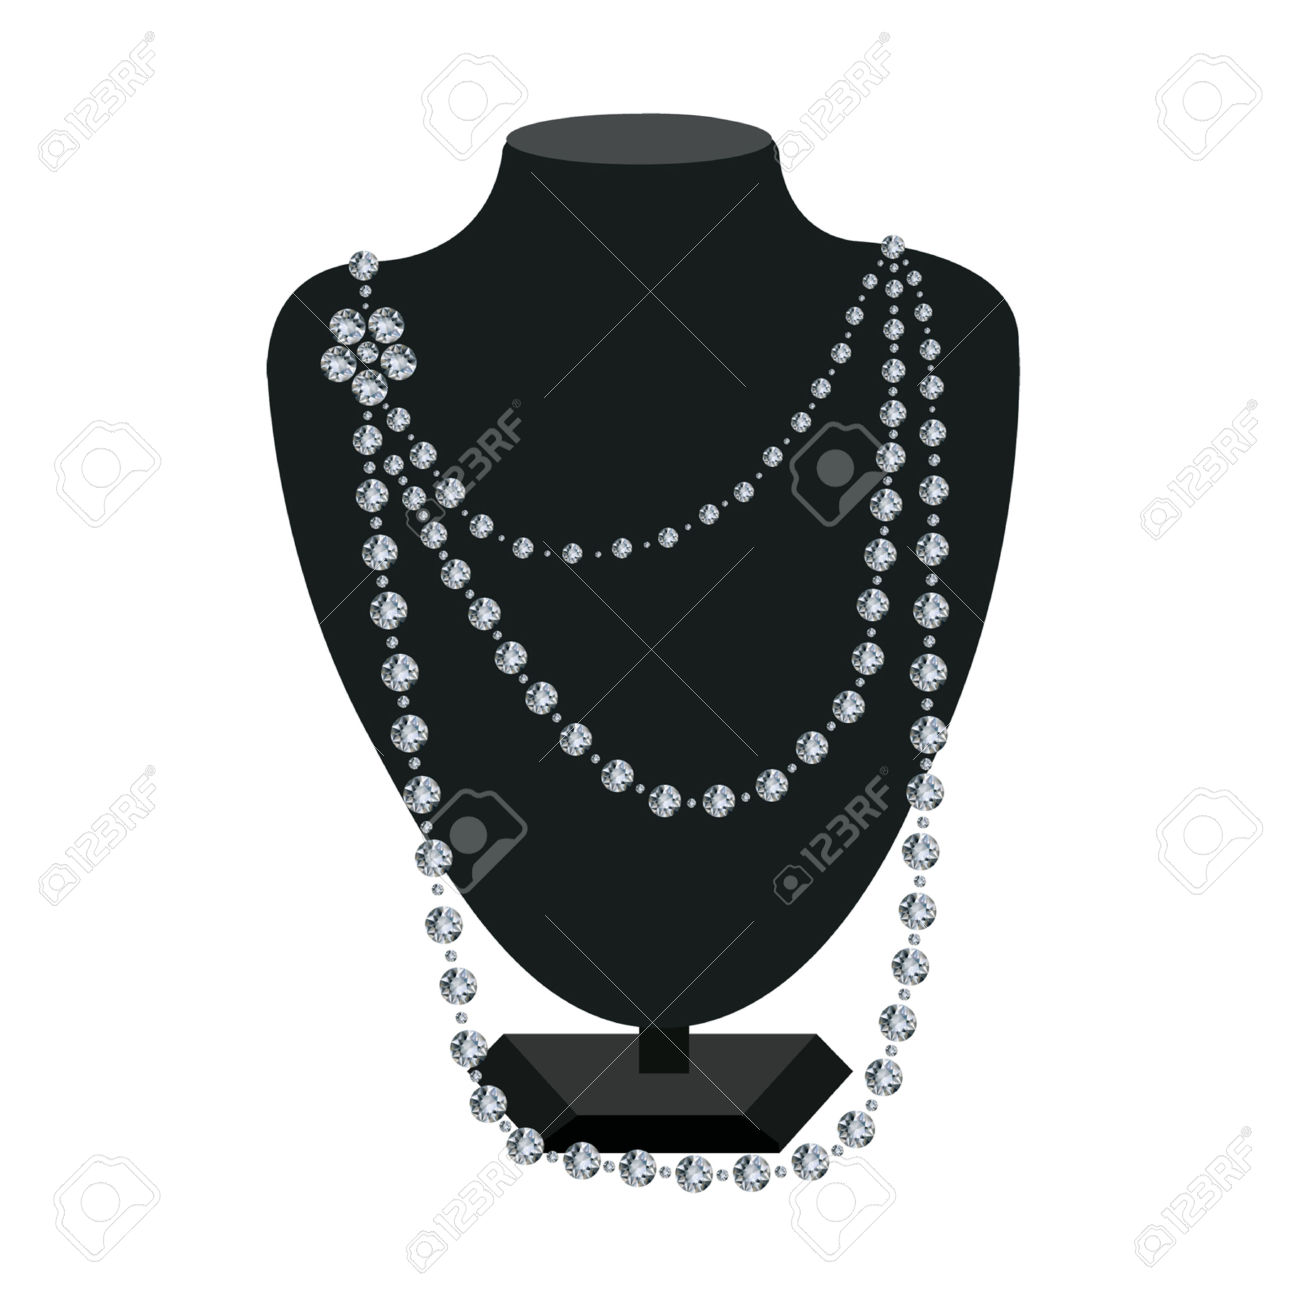 jewelry clipart images free - photo #3